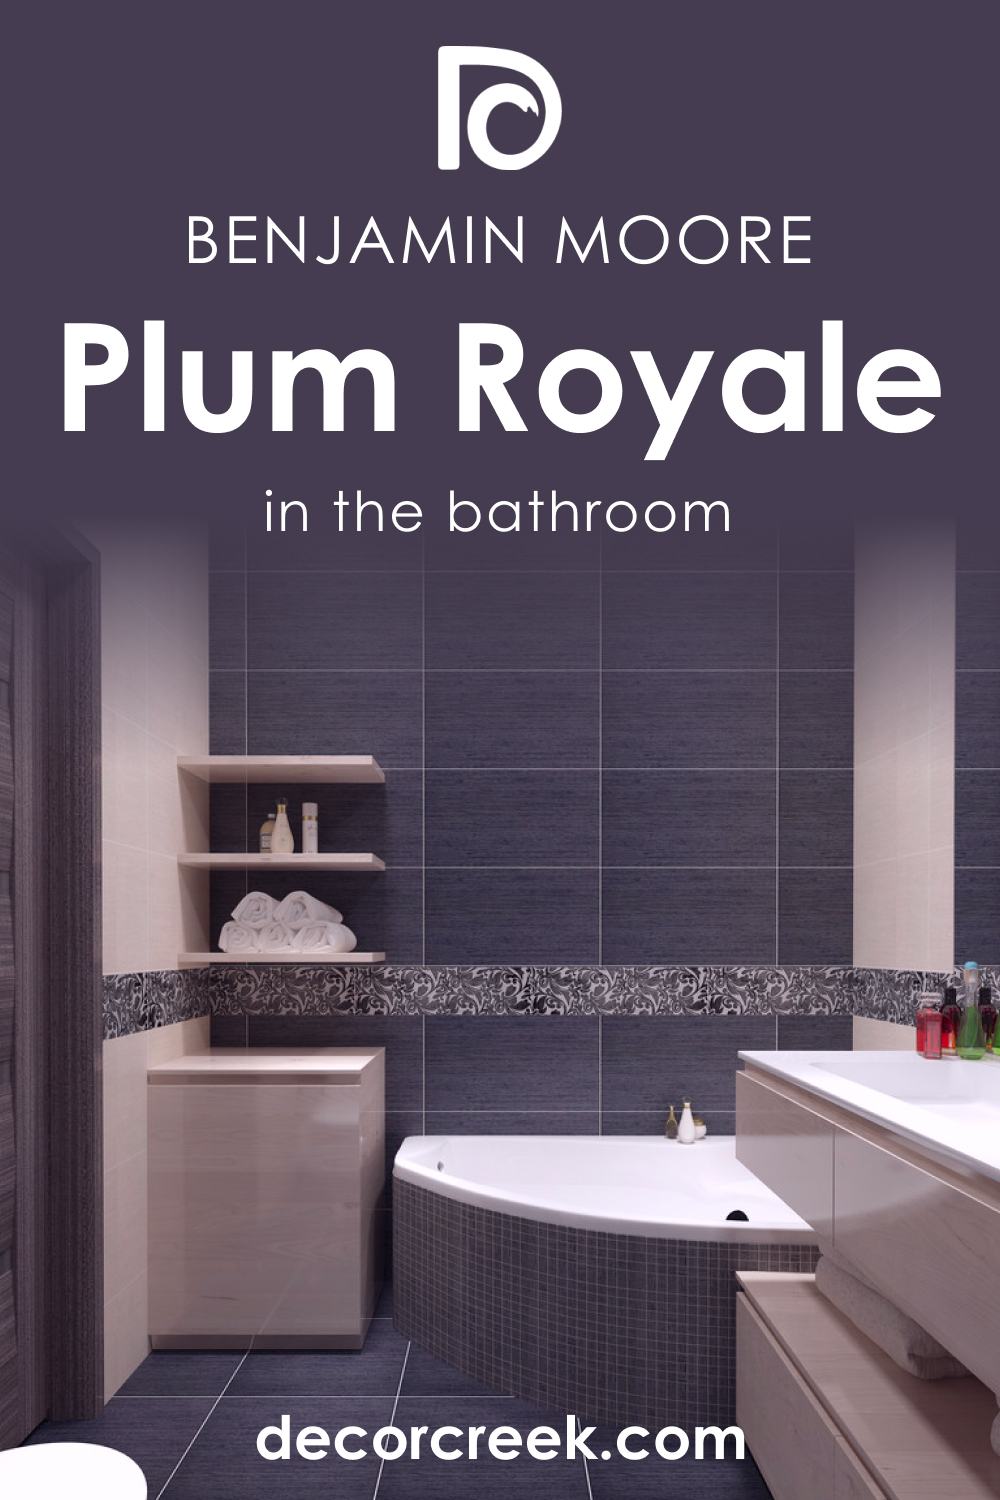 How to Use Plum Royale 2070-20 in the Bathroom?